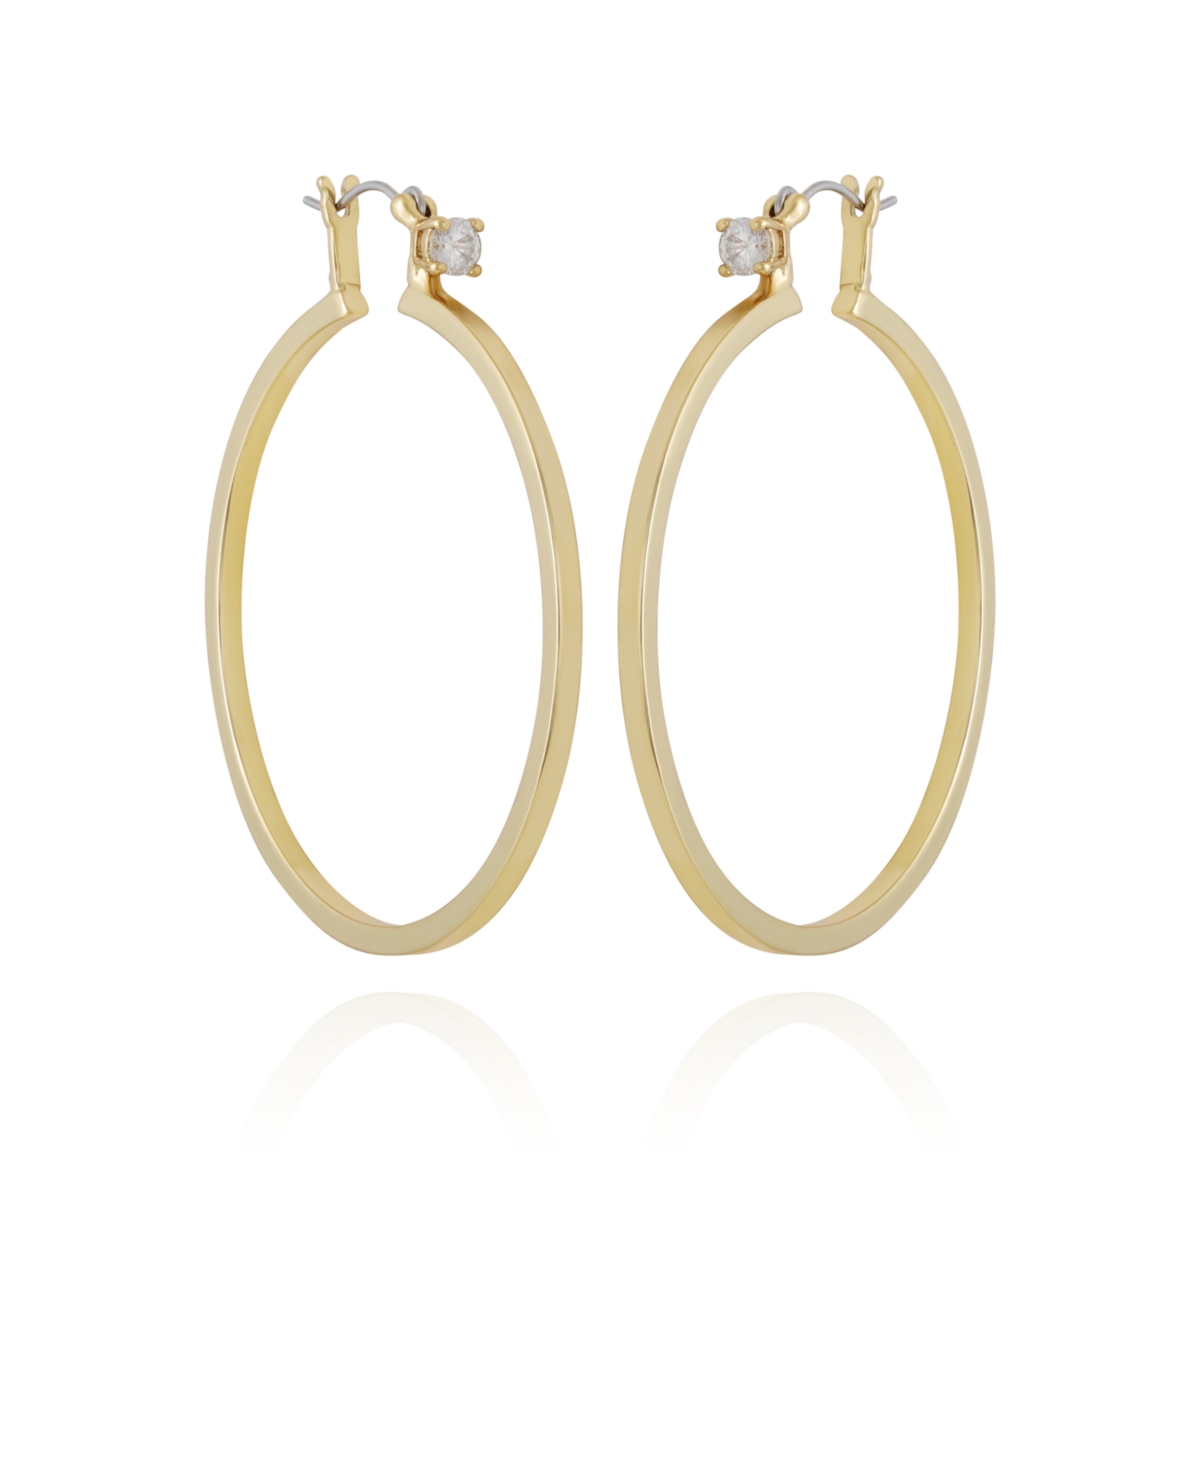 Vince Camuto Gold-tone Cubic Zirconia Large Hoops Earrings